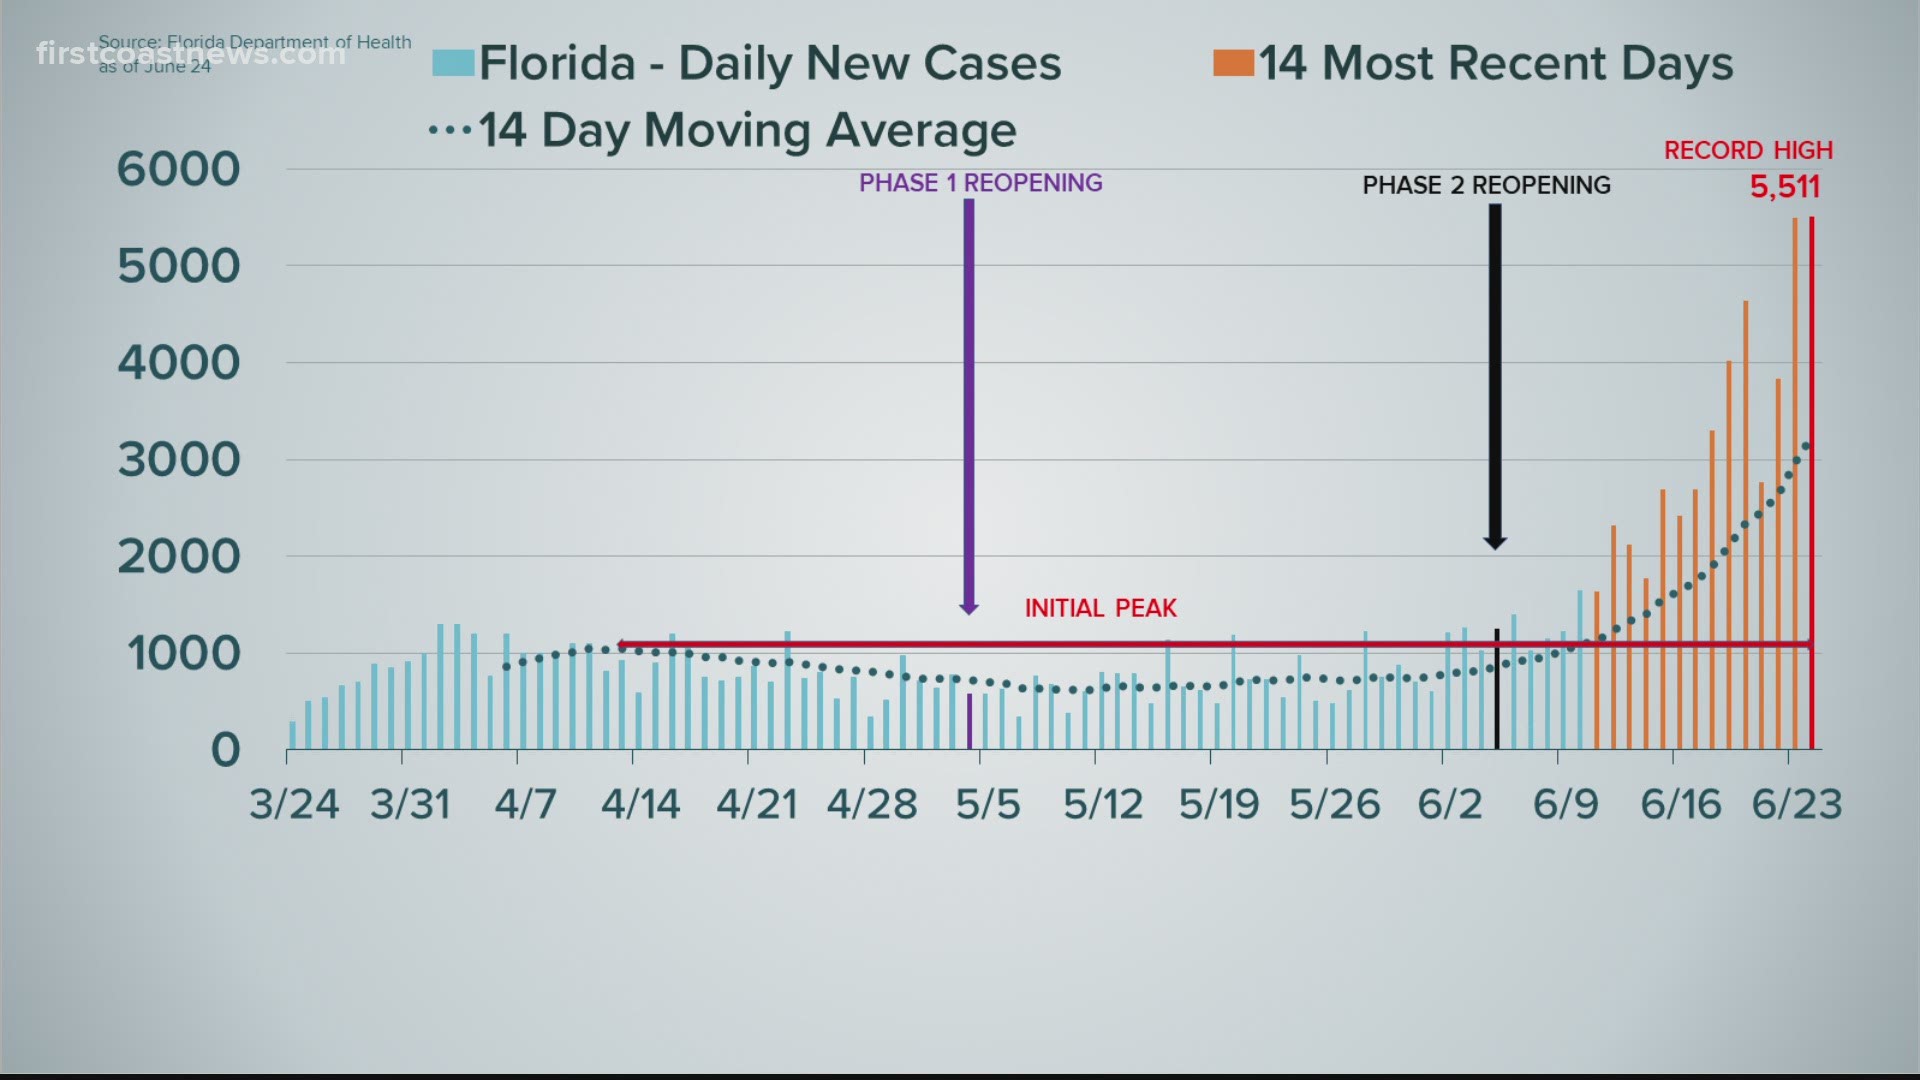 Statewide, the state record was surpassed for the number of new cases in Florida.